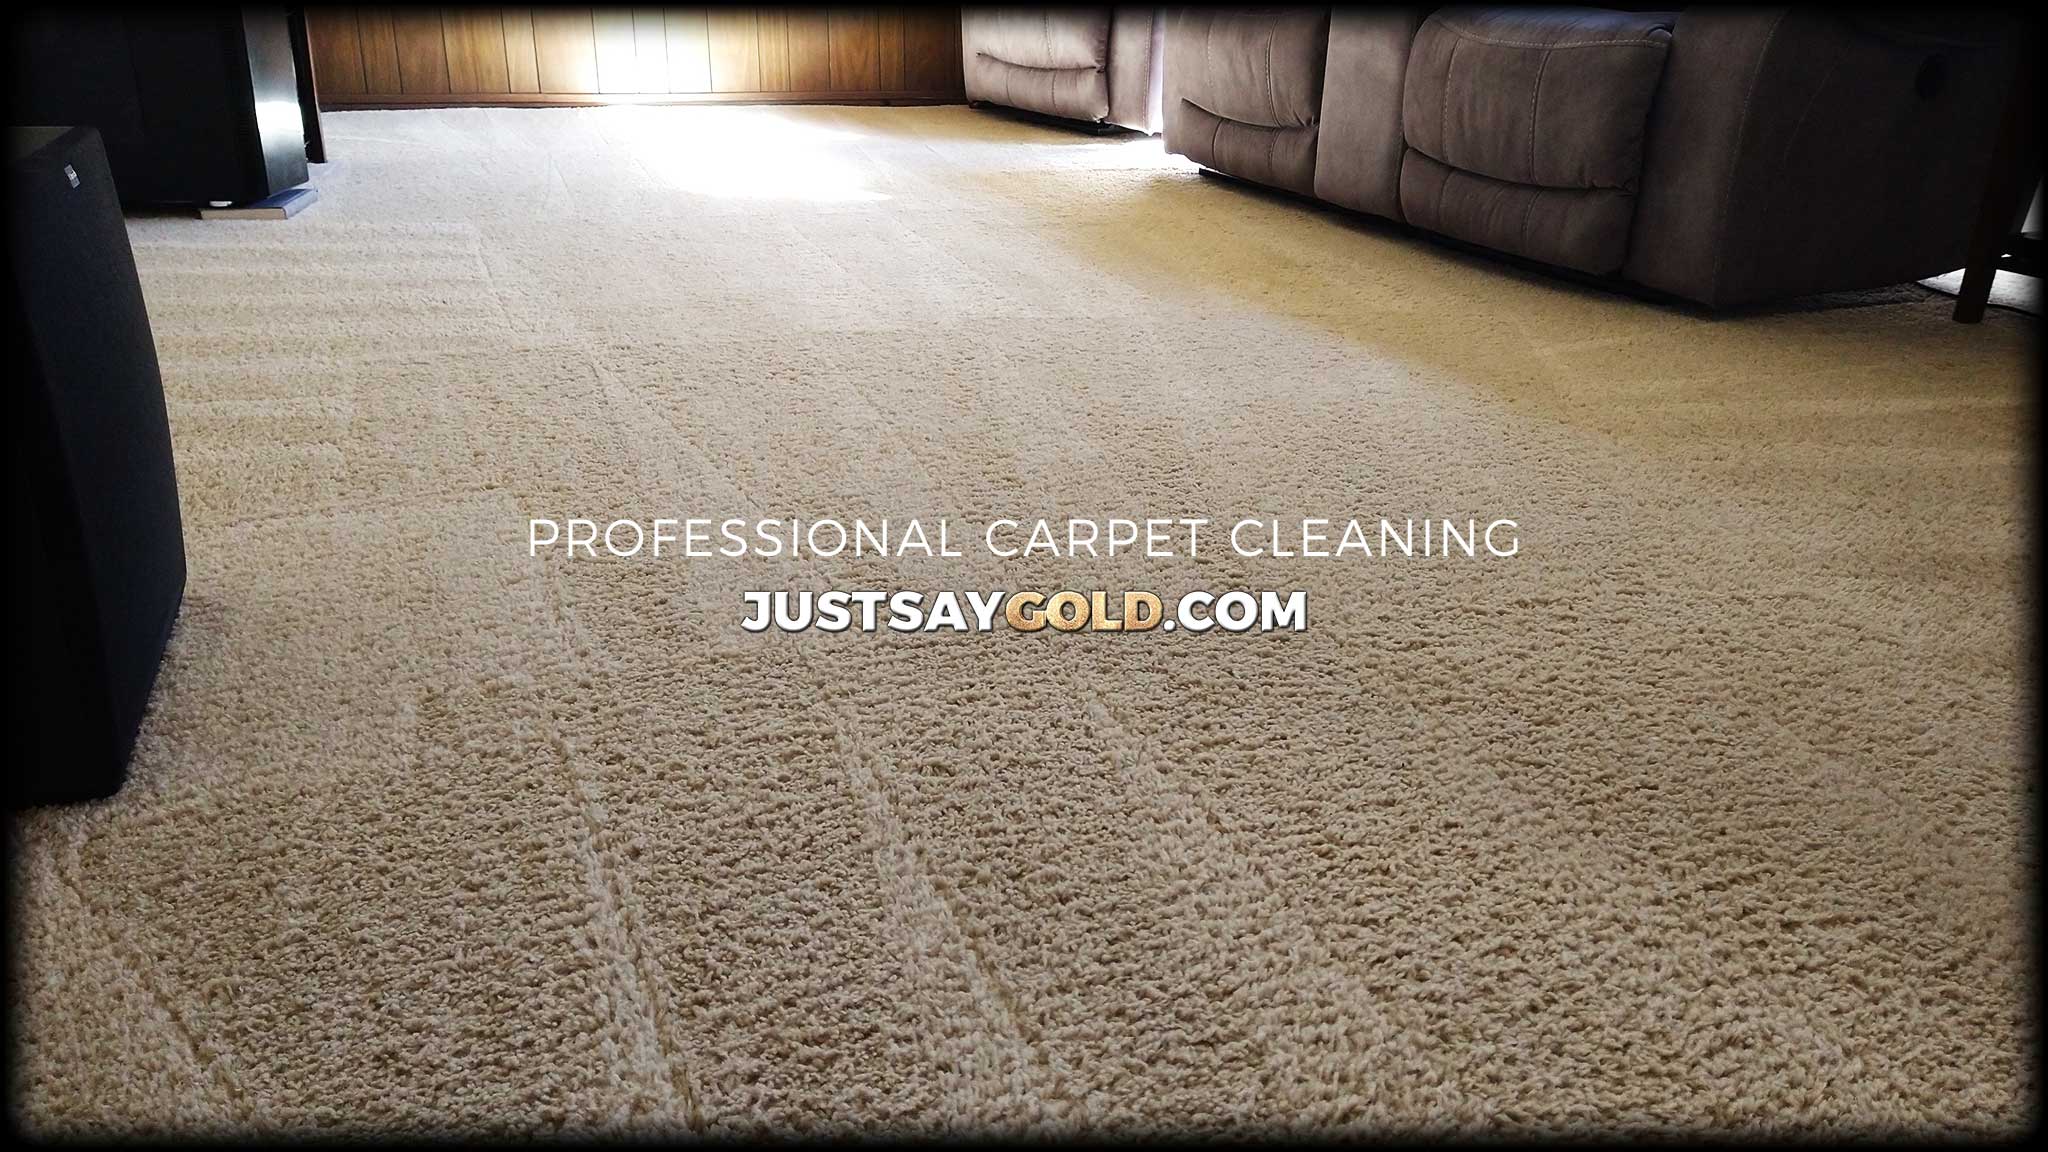 The Best Carpet Cleaning Company Citrus Heights Ca 5 Star Rated